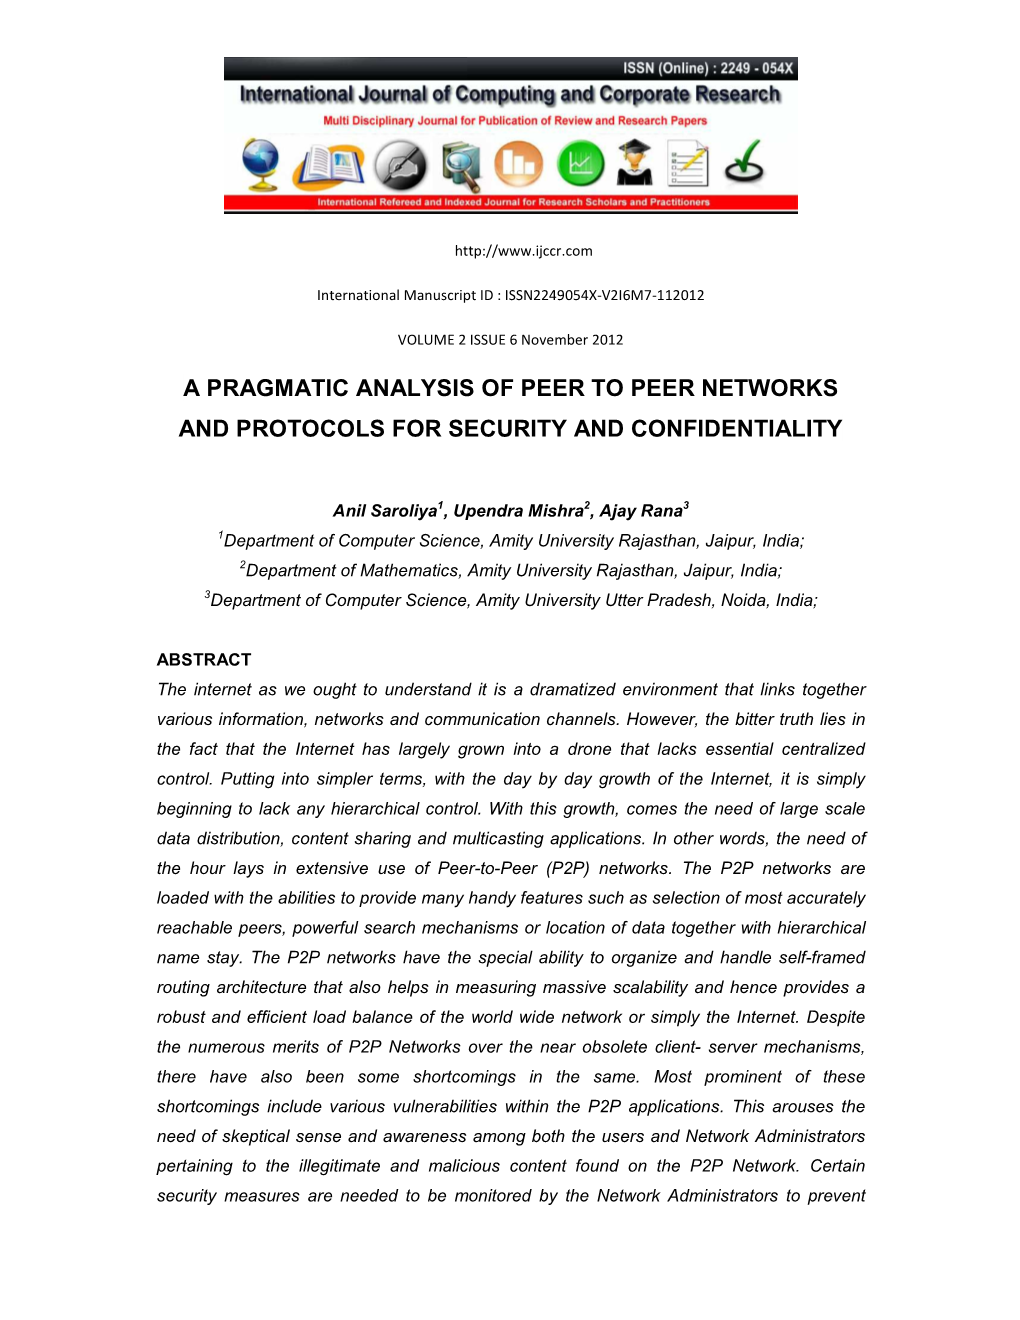 A Pragmatic Analysis of Peer to Peer Networks and Protocols for Security and Confidentiality